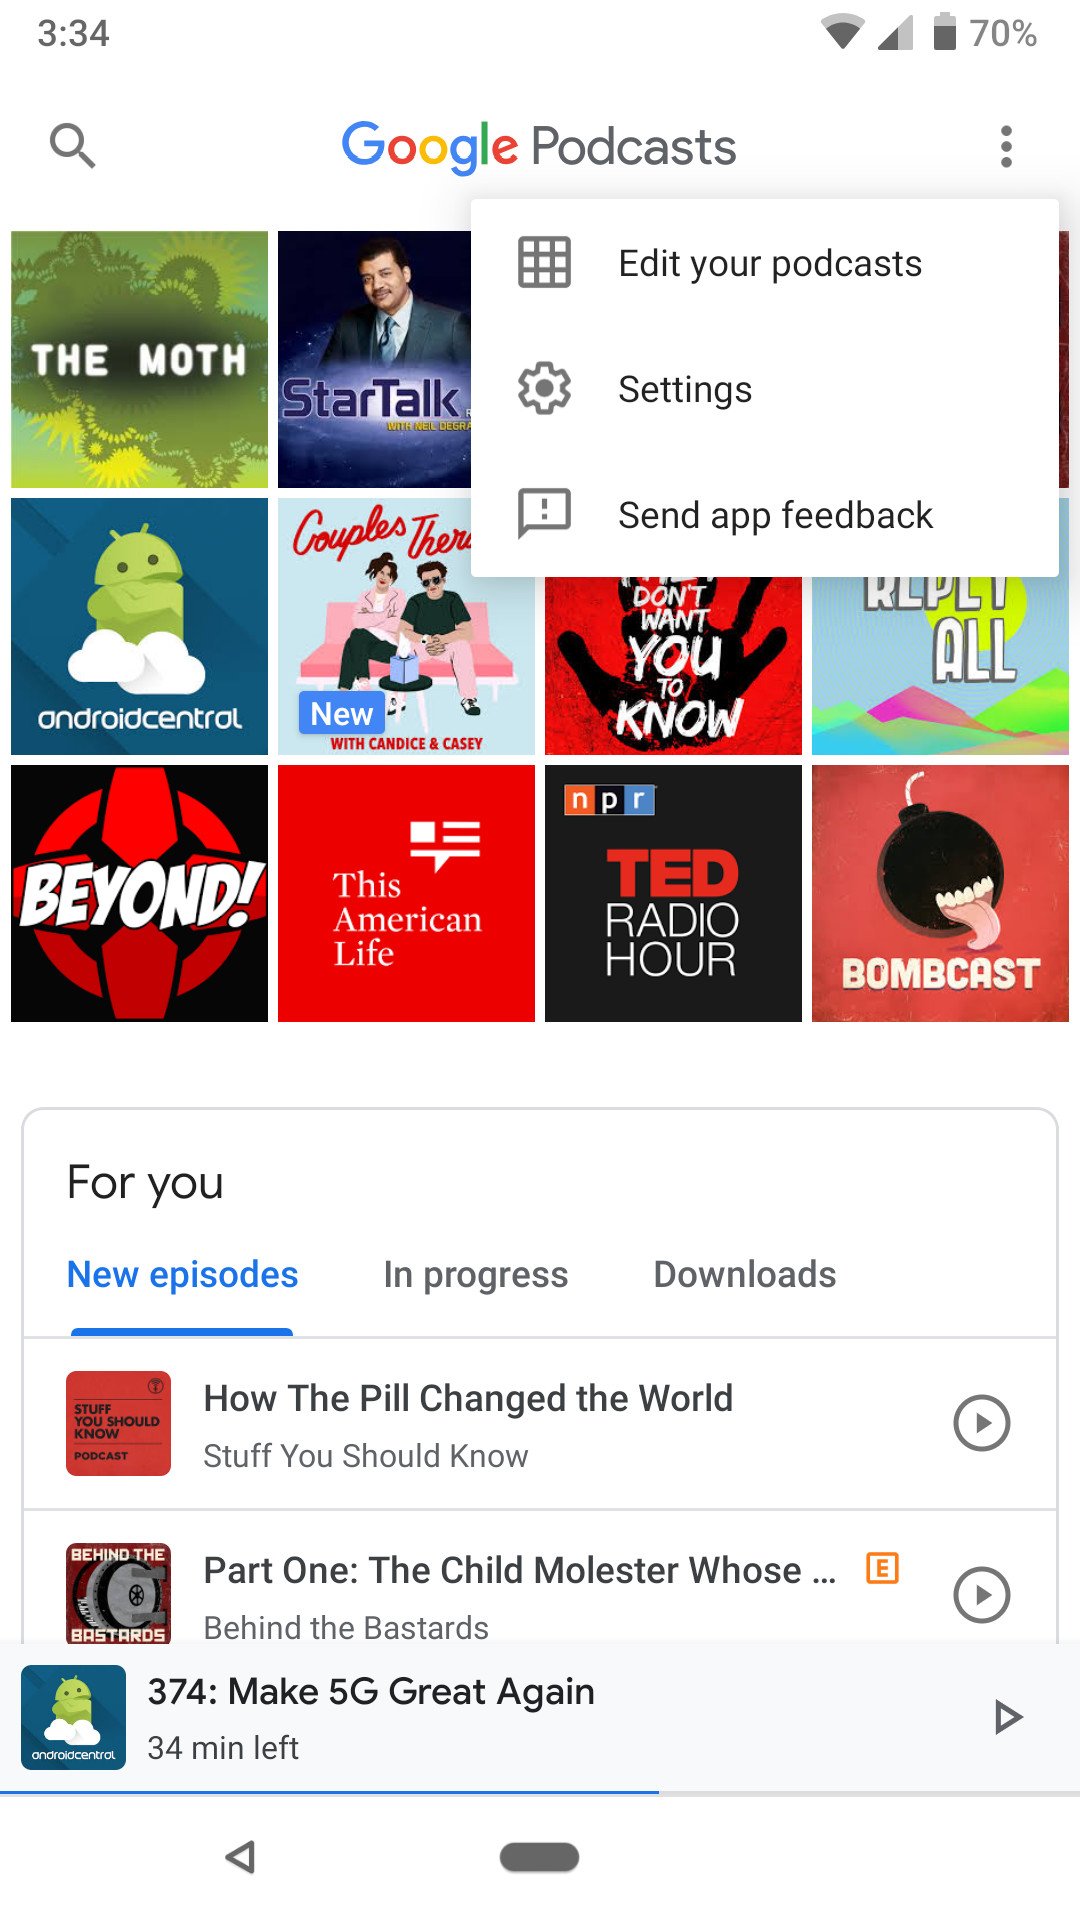 google-podcasts-how-to-use-11.jpg?itok=a